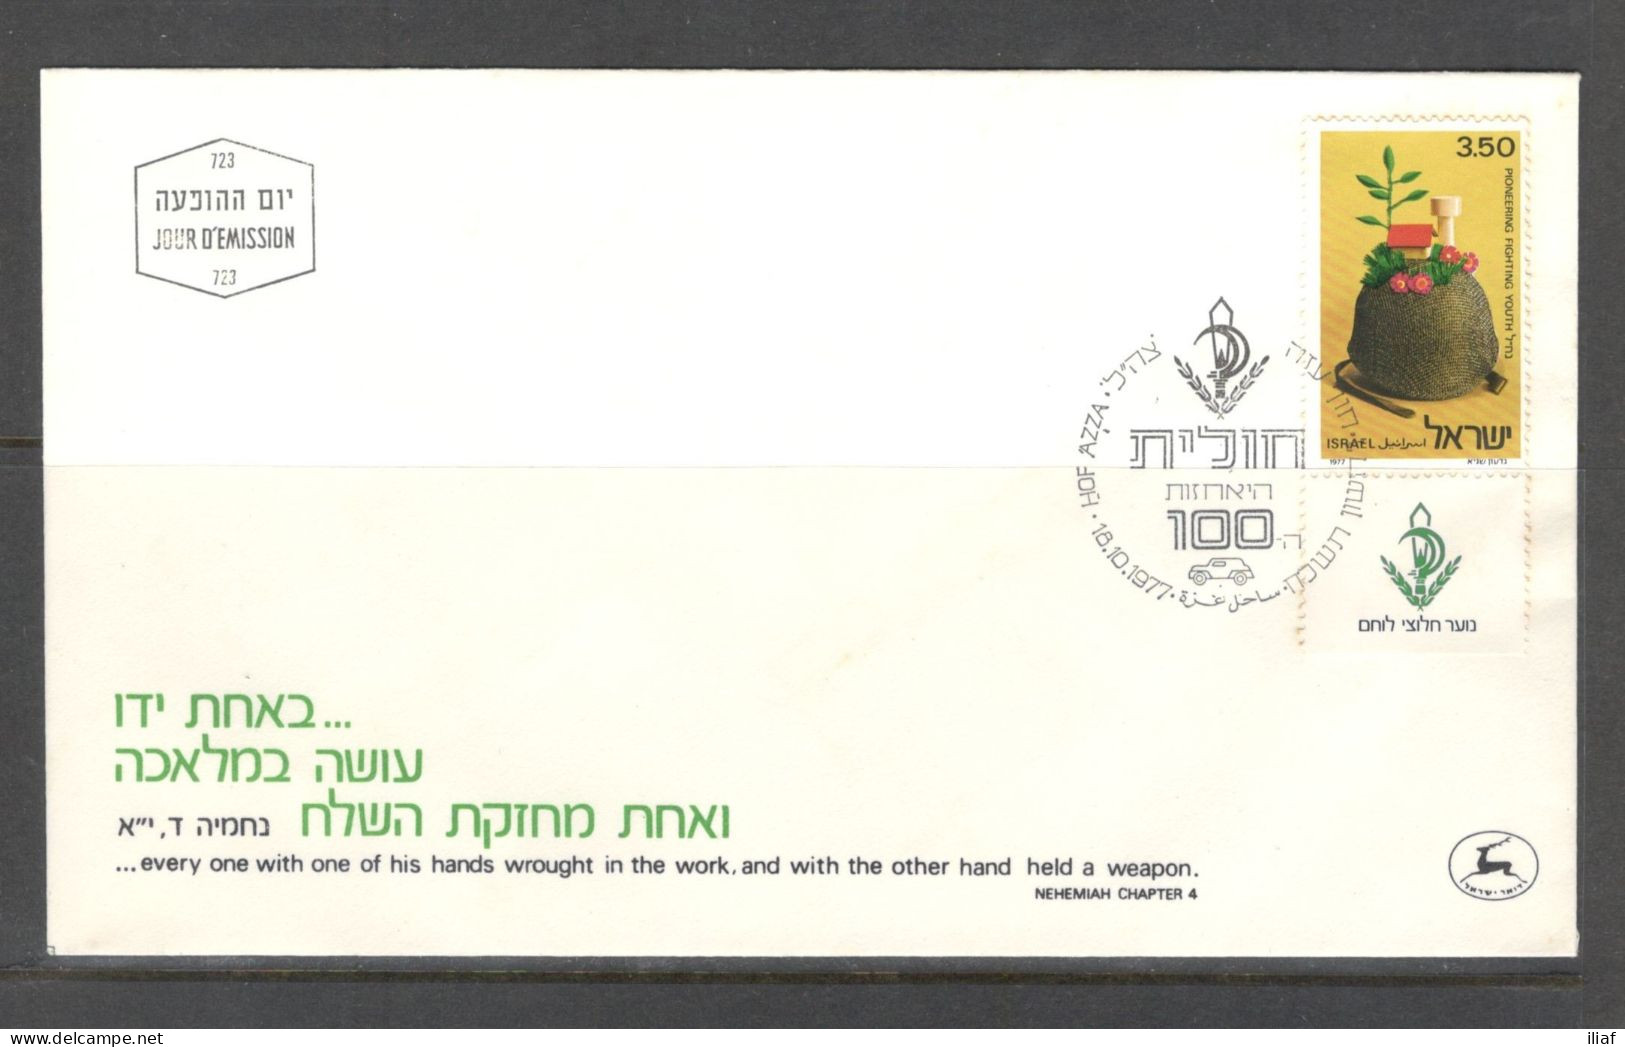 Israel 1977 FDC Sc. 646  “NAHAL” Pioneering Fighting Youth FDC Cancellation On Cachet FDC Envelope - FDC